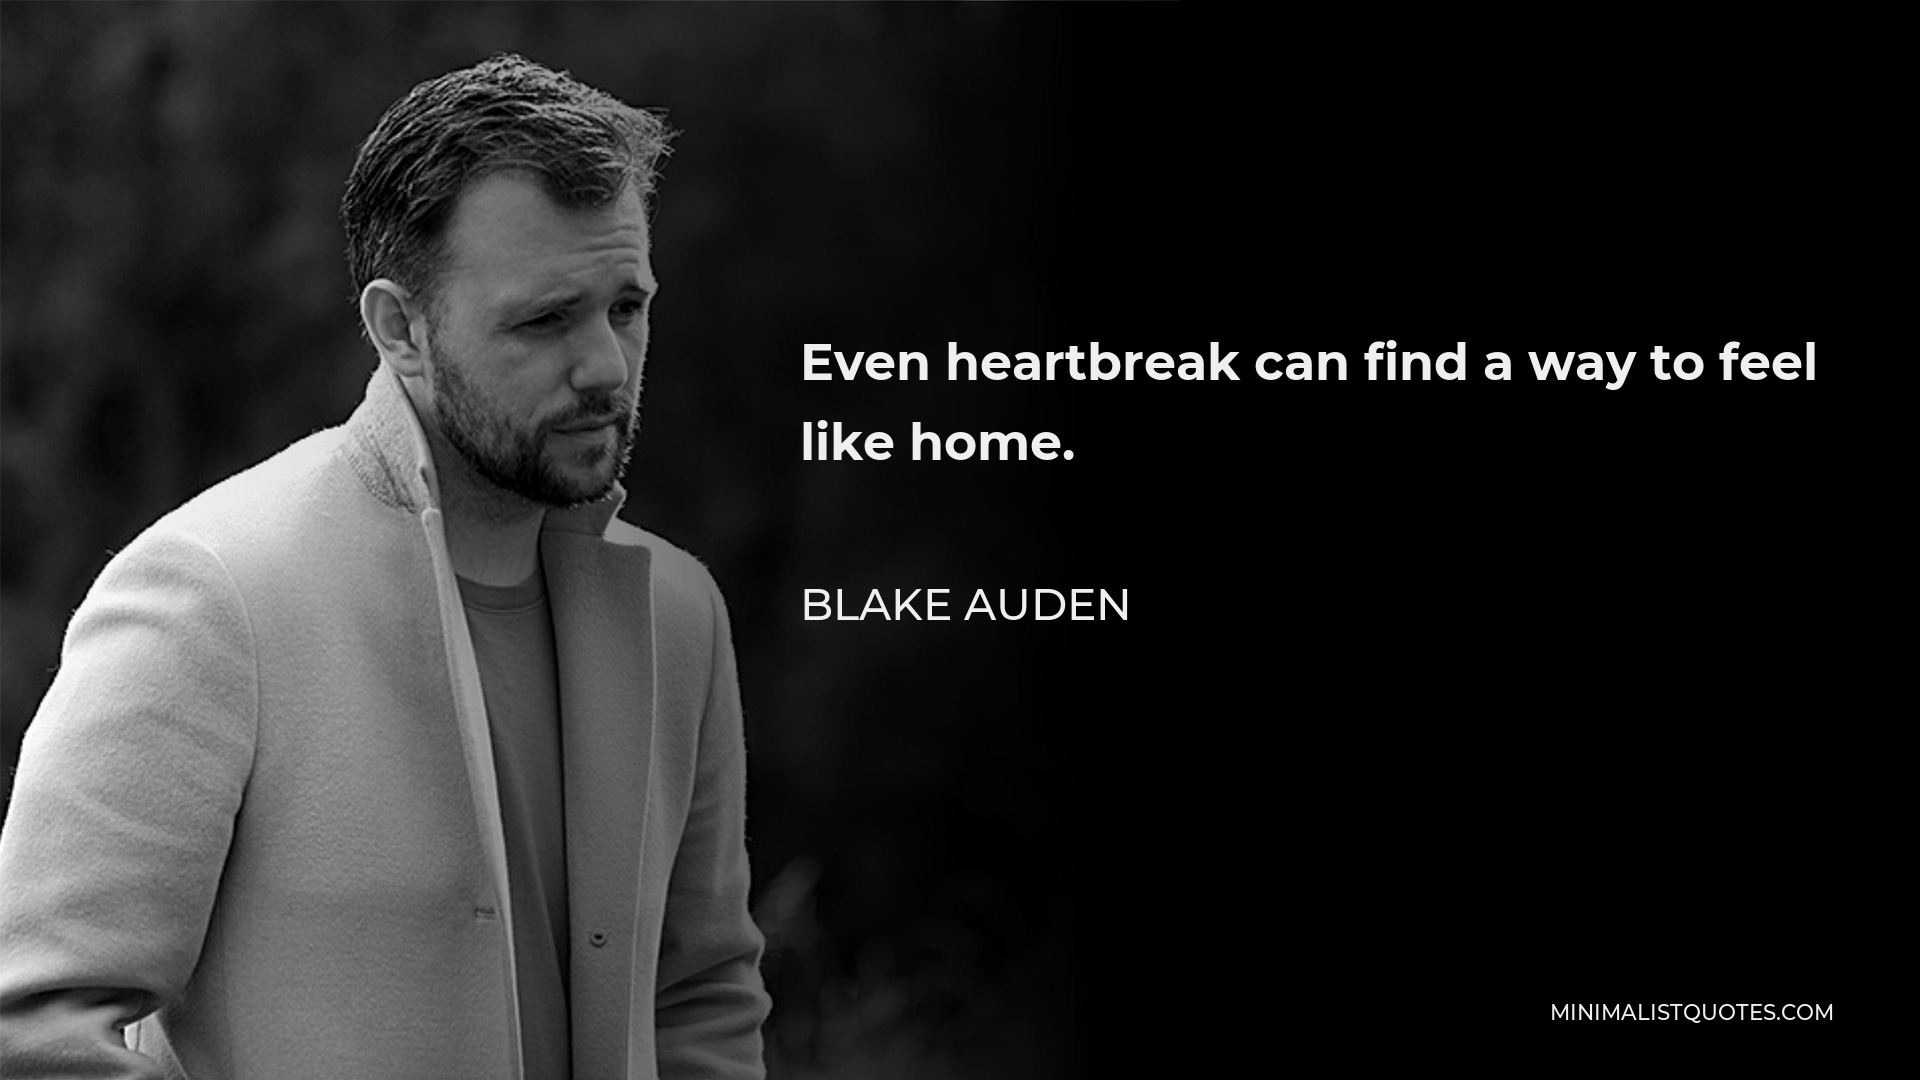 Blake Auden Quote - Even heartbreak can find a way to feel like home.